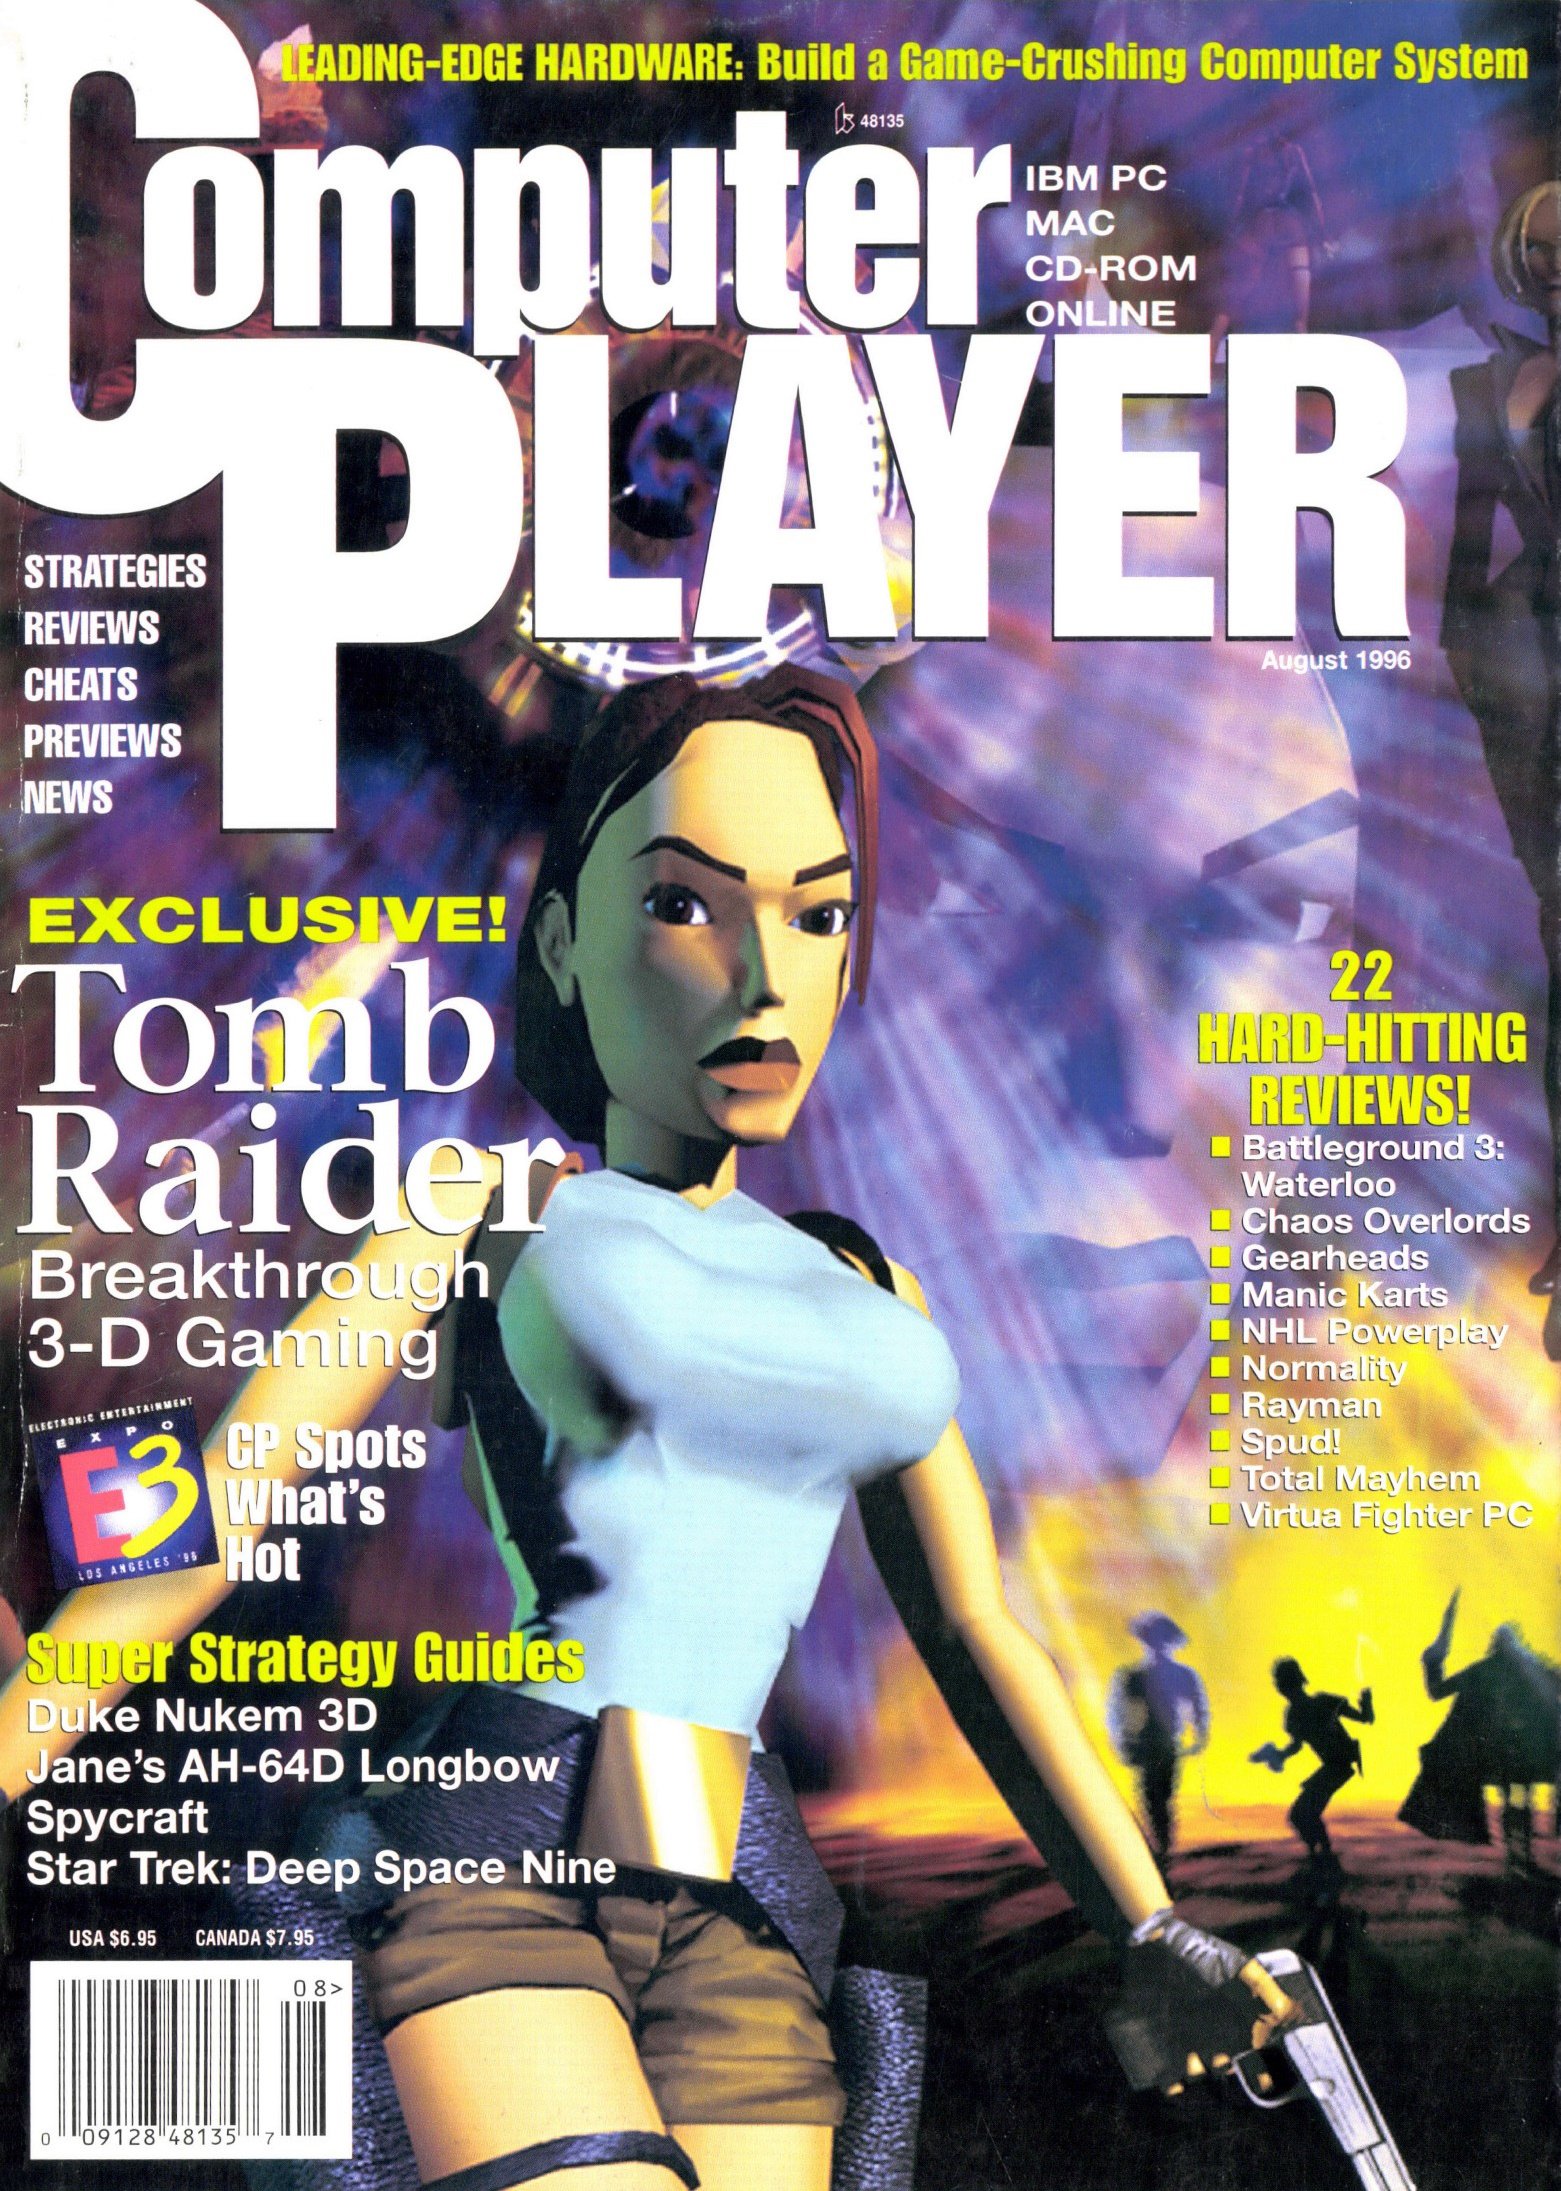 Computer Player Vol.3 Issue 3 (August 1996)